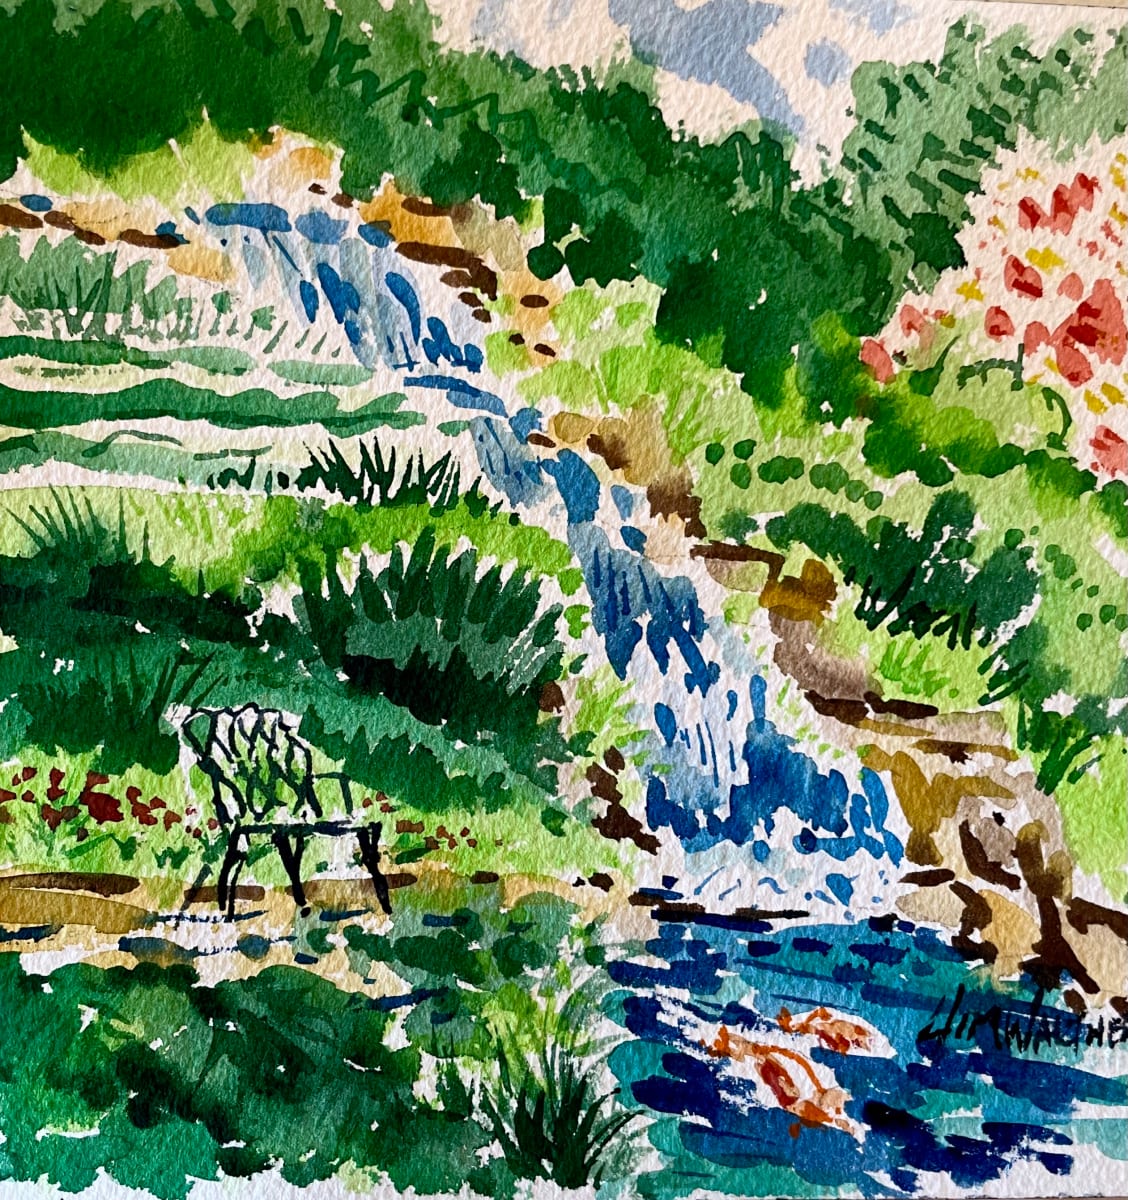 Garden View at the Bradshaws by Jim Walther  Image: A painting done on location for our dear friends Bill and Dee Bradshaw of their beautiful mountaintop garden in Greenville SC.